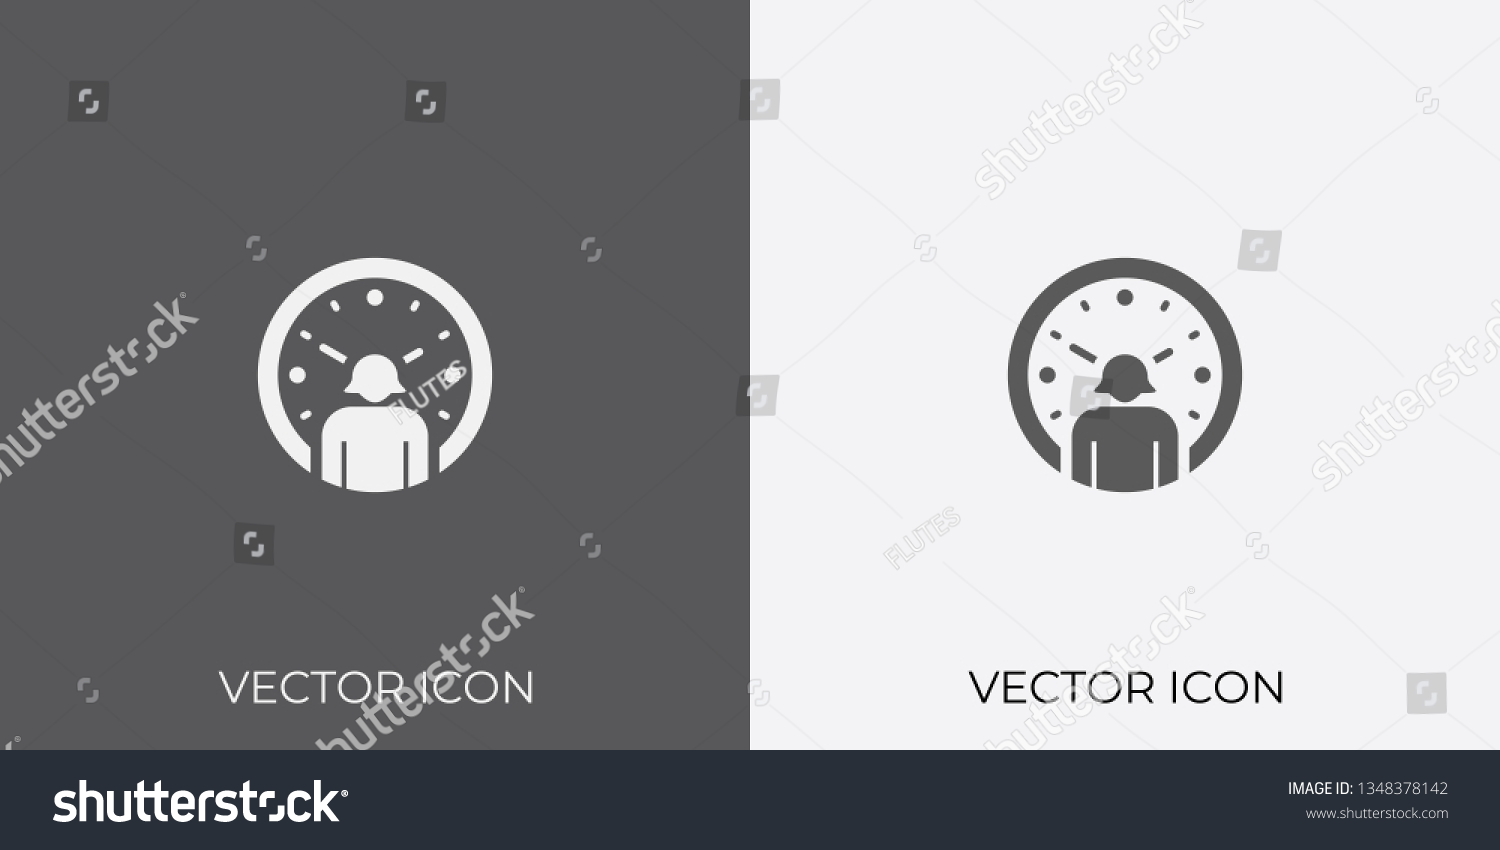 SVG of Light & Dark Gray Icon of Man With Clock For Mobile, Software & App.. Eps. 10. - Vector svg